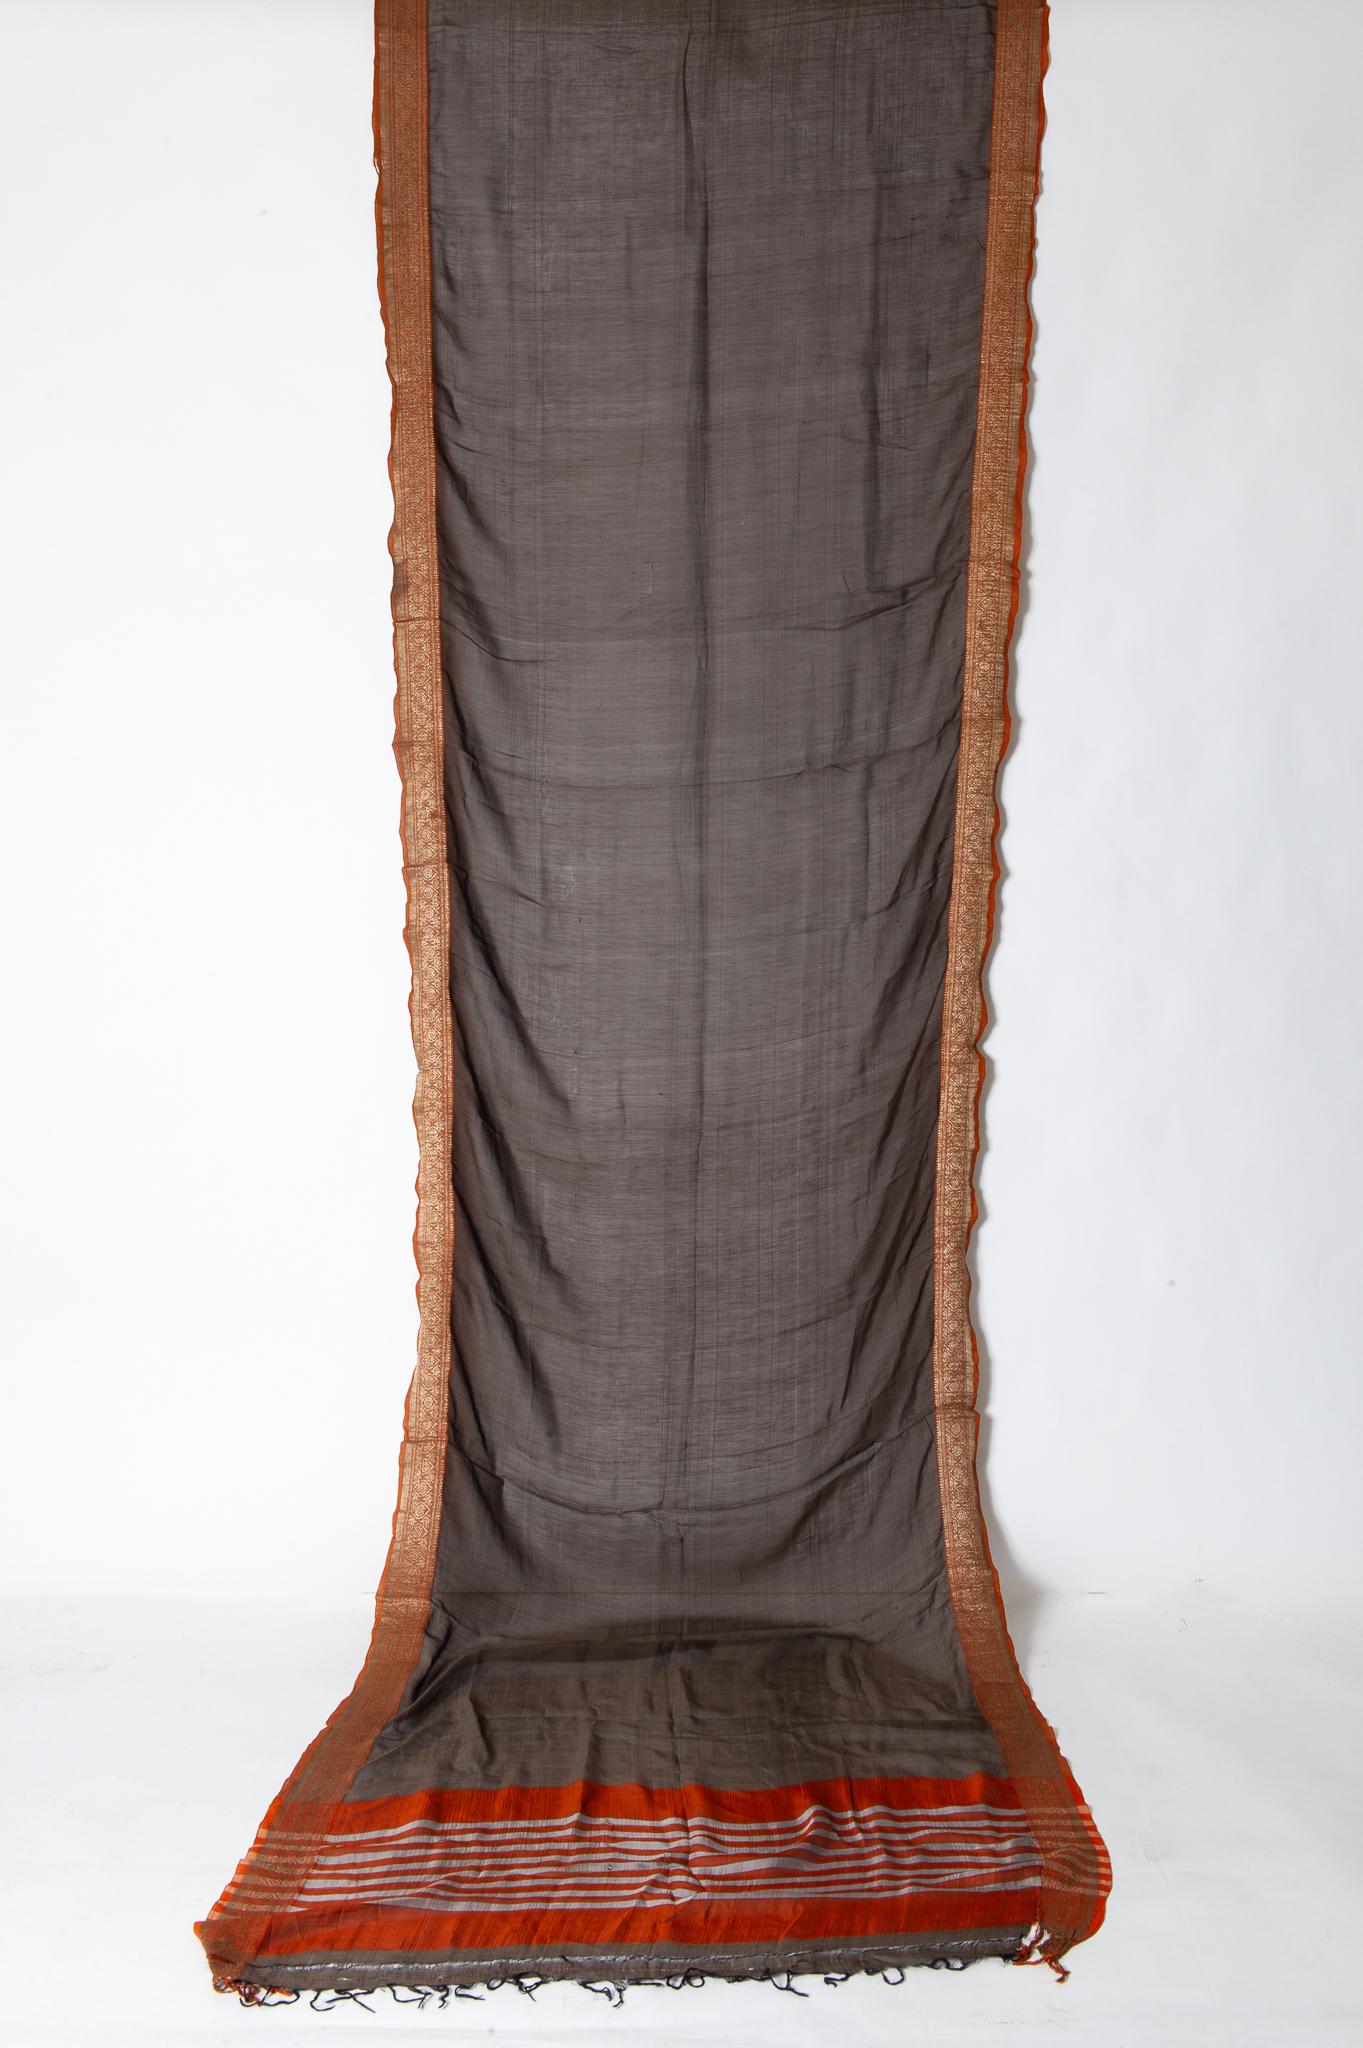 Vintage Indian Sari: brown color with a brick red and gold border-
New idea for an evening dress or. for unusual curtains in bedroom .  Price is very low, therefore (if possible) I advice You to order almost two ones (for shipping cost). I'm closing